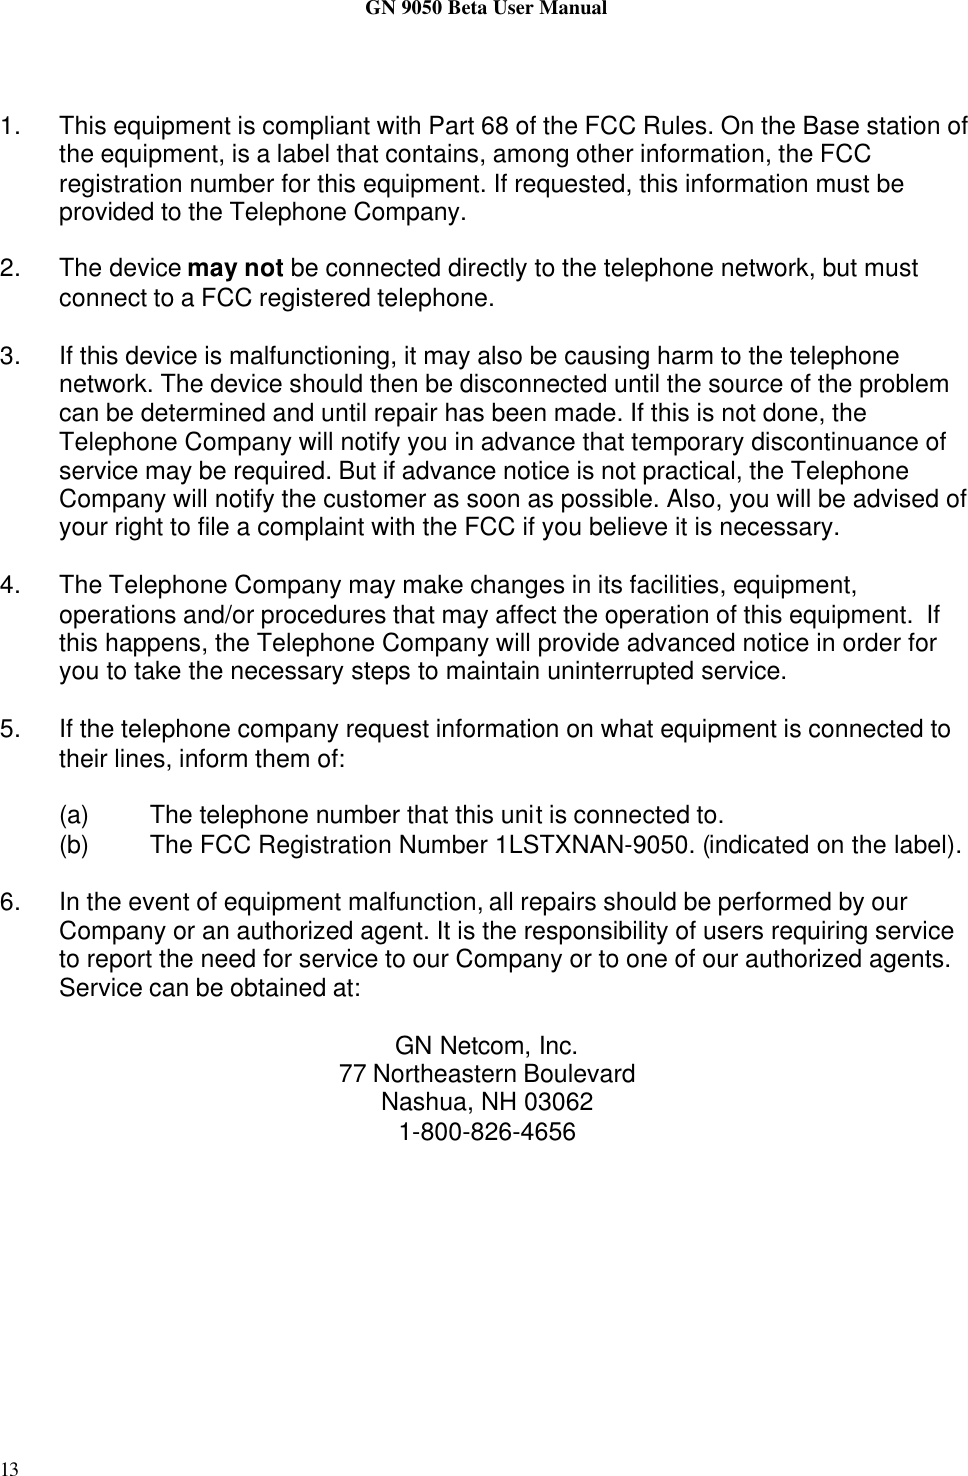 GN 9050 Beta User Manual131. This equipment is compliant with Part 68 of the FCC Rules. On the Base station ofthe equipment, is a label that contains, among other information, the FCCregistration number for this equipment. If requested, this information must beprovided to the Telephone Company.2. The device may not be connected directly to the telephone network, but mustconnect to a FCC registered telephone.3. If this device is malfunctioning, it may also be causing harm to the telephonenetwork. The device should then be disconnected until the source of the problemcan be determined and until repair has been made. If this is not done, theTelephone Company will notify you in advance that temporary discontinuance ofservice may be required. But if advance notice is not practical, the TelephoneCompany will notify the customer as soon as possible. Also, you will be advised ofyour right to file a complaint with the FCC if you believe it is necessary.4. The Telephone Company may make changes in its facilities, equipment,operations and/or procedures that may affect the operation of this equipment.  Ifthis happens, the Telephone Company will provide advanced notice in order foryou to take the necessary steps to maintain uninterrupted service.5. If the telephone company request information on what equipment is connected totheir lines, inform them of:(a) The telephone number that this unit is connected to.(b) The FCC Registration Number 1LSTXNAN-9050. (indicated on the label).6. In the event of equipment malfunction, all repairs should be performed by ourCompany or an authorized agent. It is the responsibility of users requiring serviceto report the need for service to our Company or to one of our authorized agents.Service can be obtained at:GN Netcom, Inc.77 Northeastern BoulevardNashua, NH 030621-800-826-4656